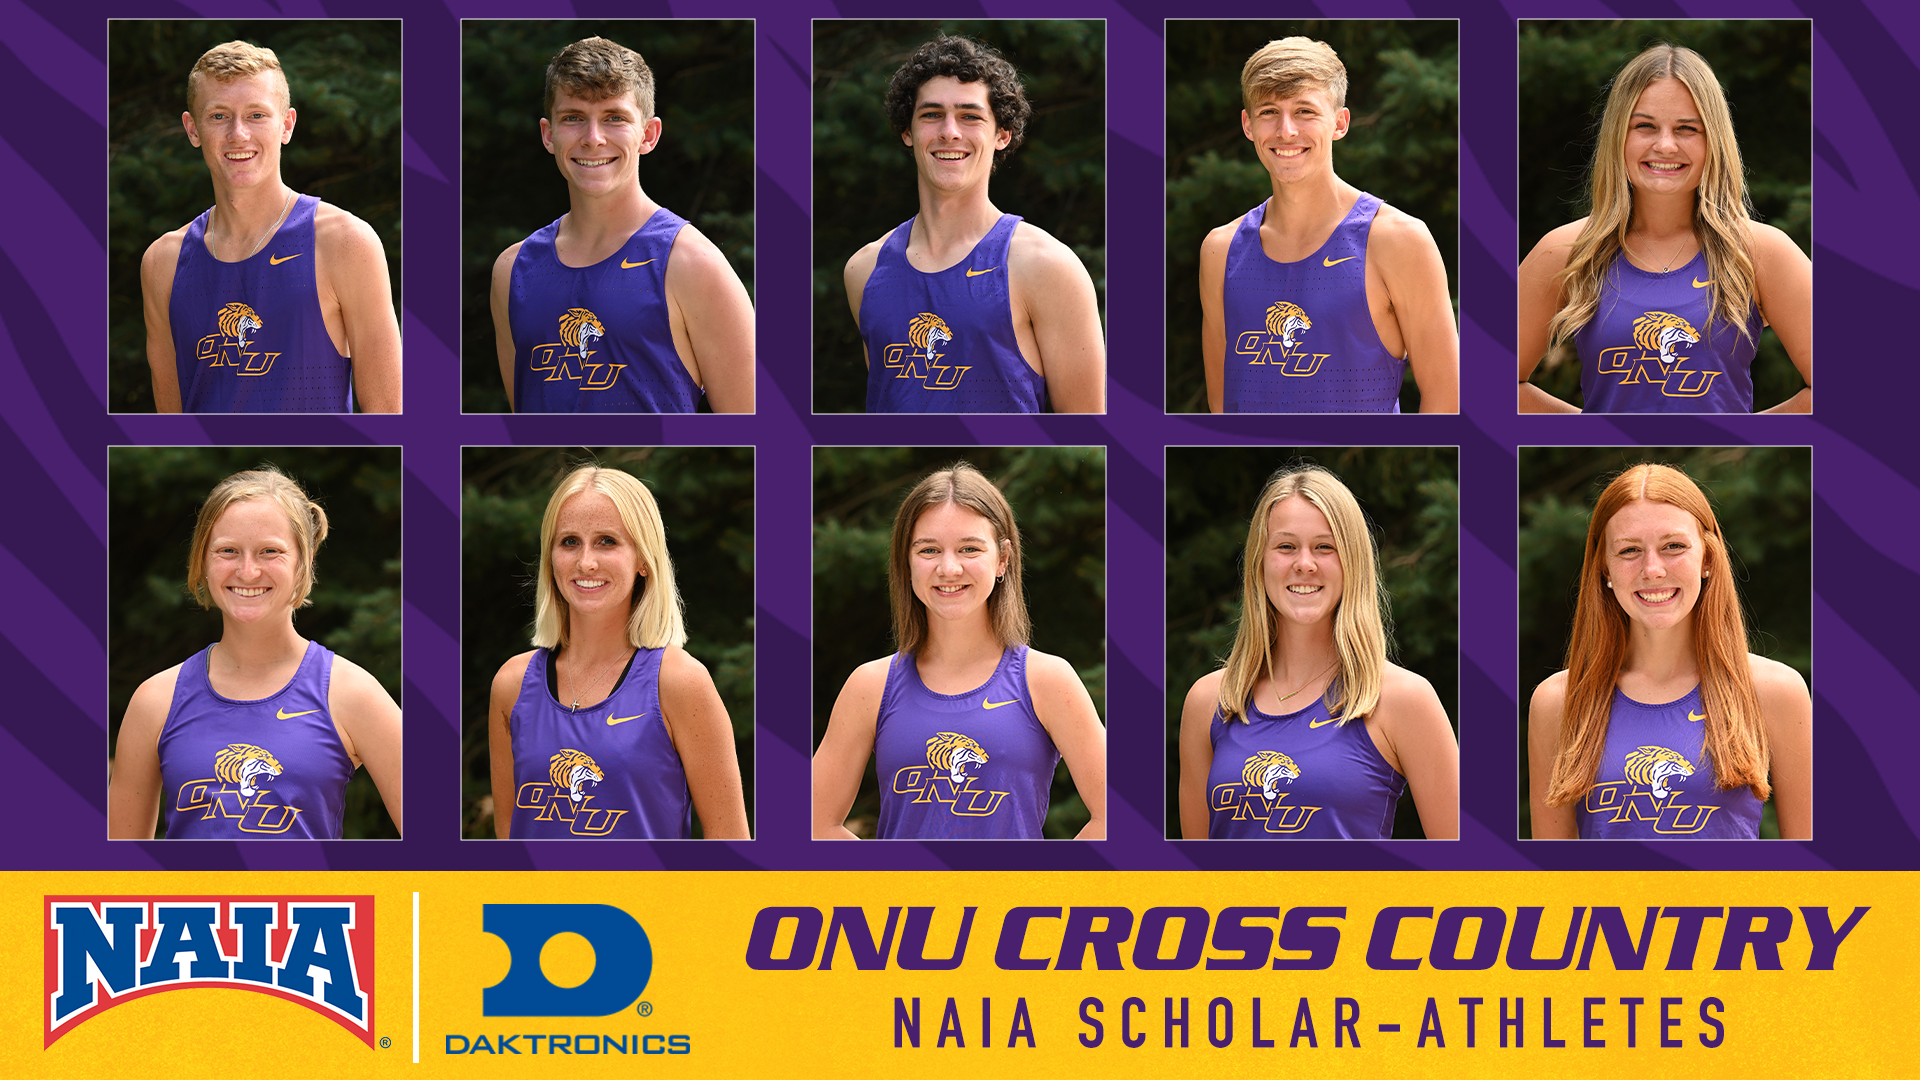 ONU CROSS COUNTRY LANDS 10 NAMES ON NAIA SCHOLAR-ATHLETE HONOR ROLL